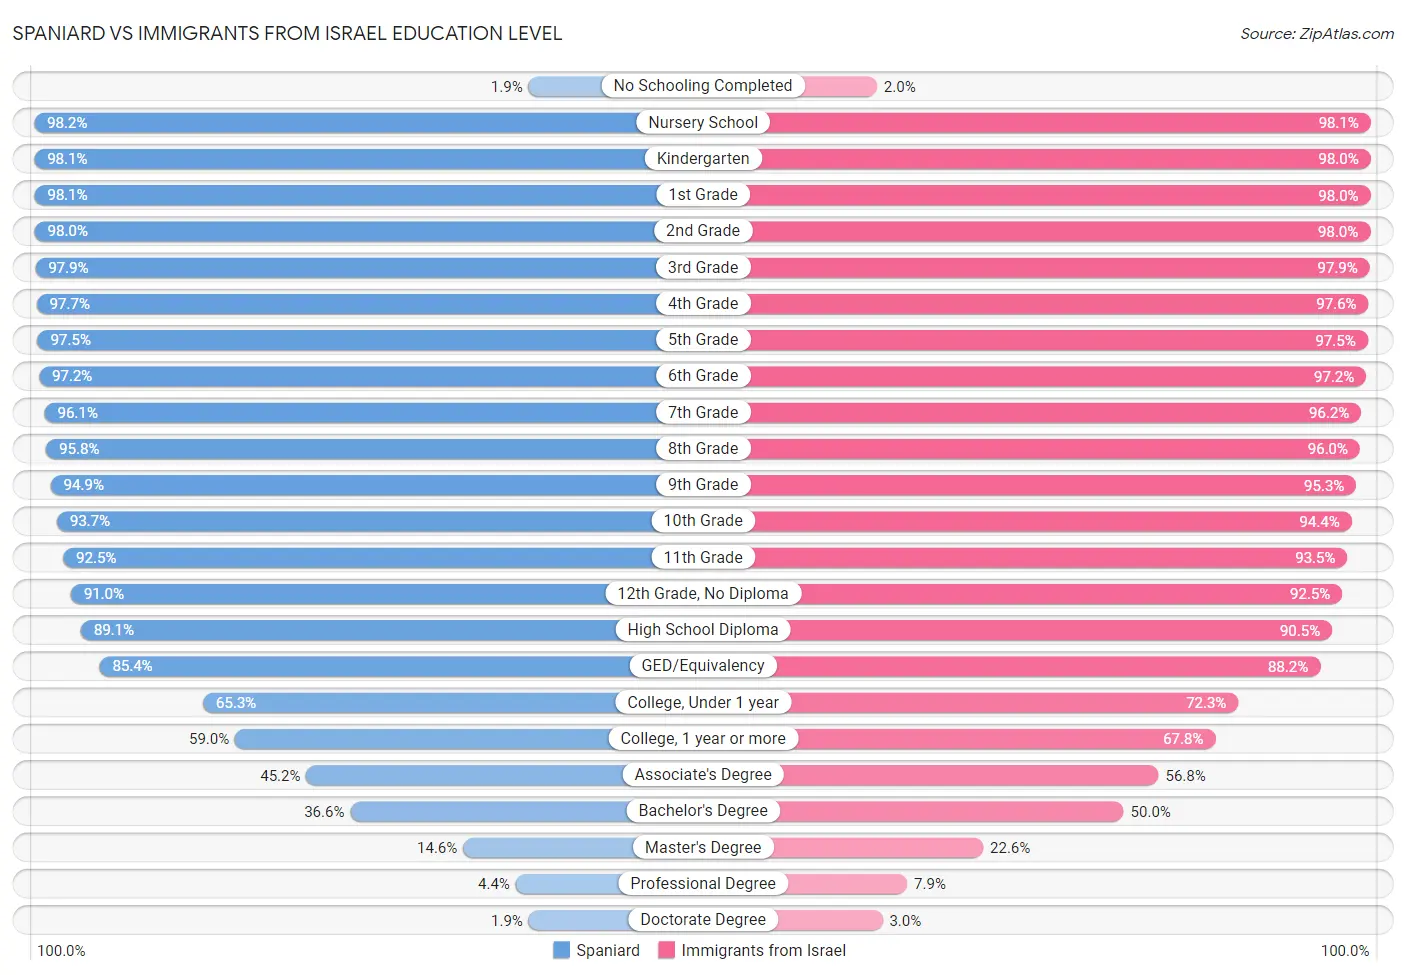 Spaniard vs Immigrants from Israel Education Level